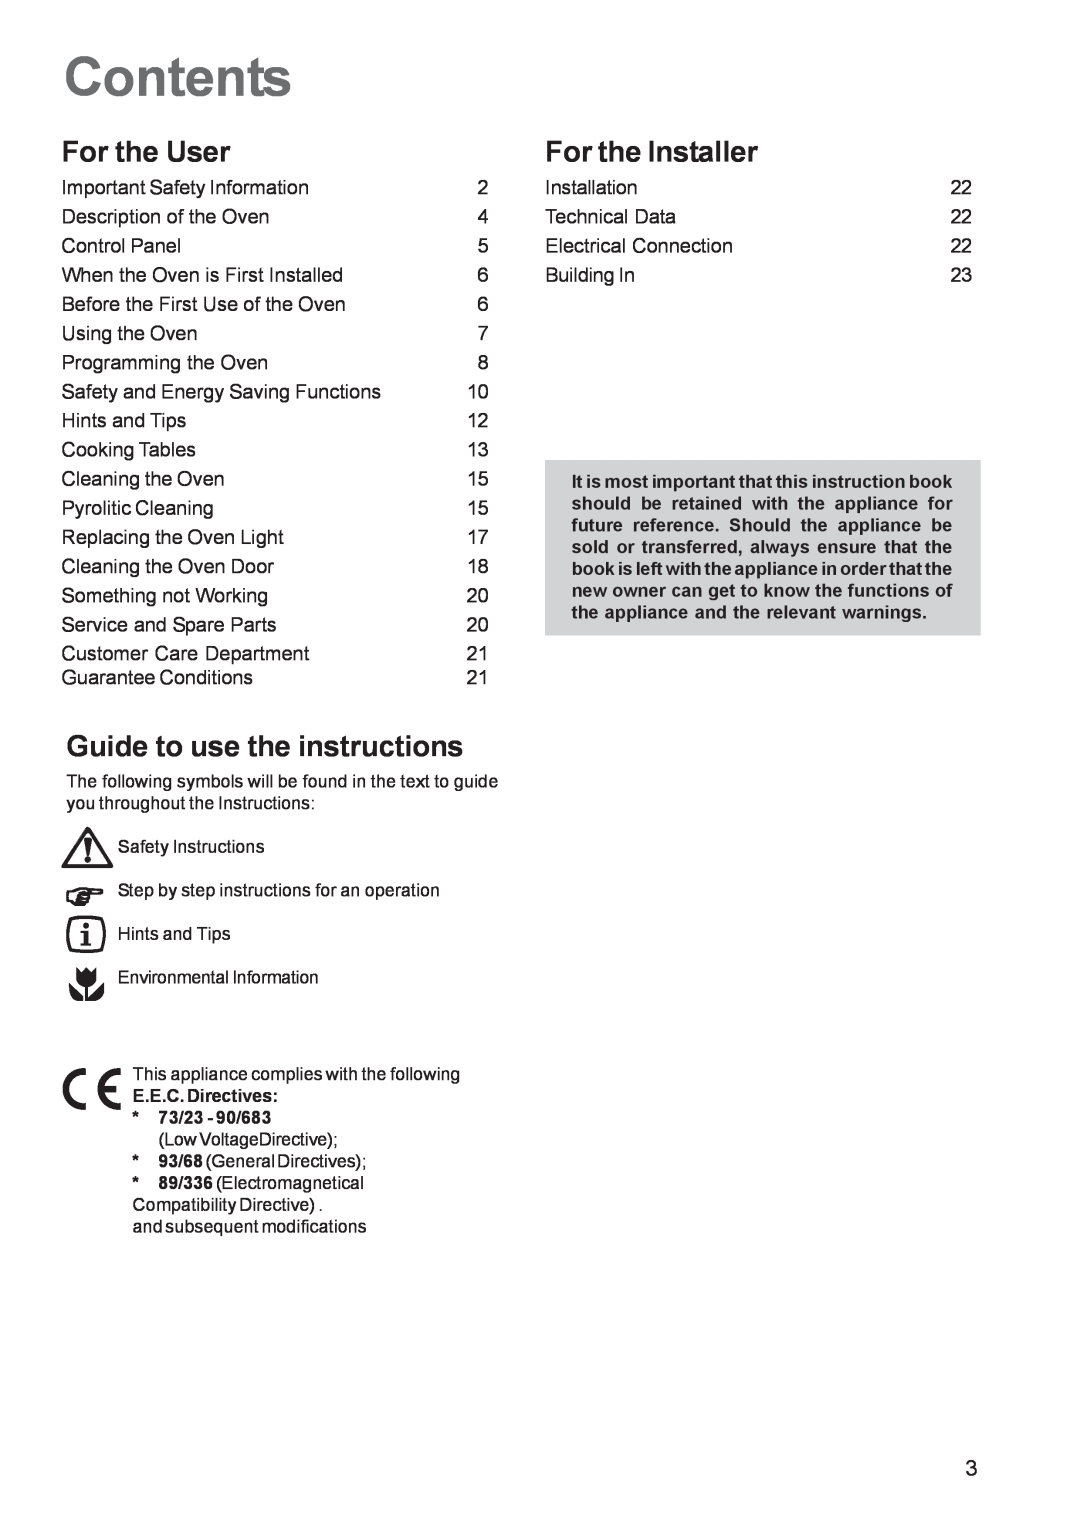 Zanussi ZPB 1260 manual Contents, For the User, Guide to use the instructions, For the Installer 